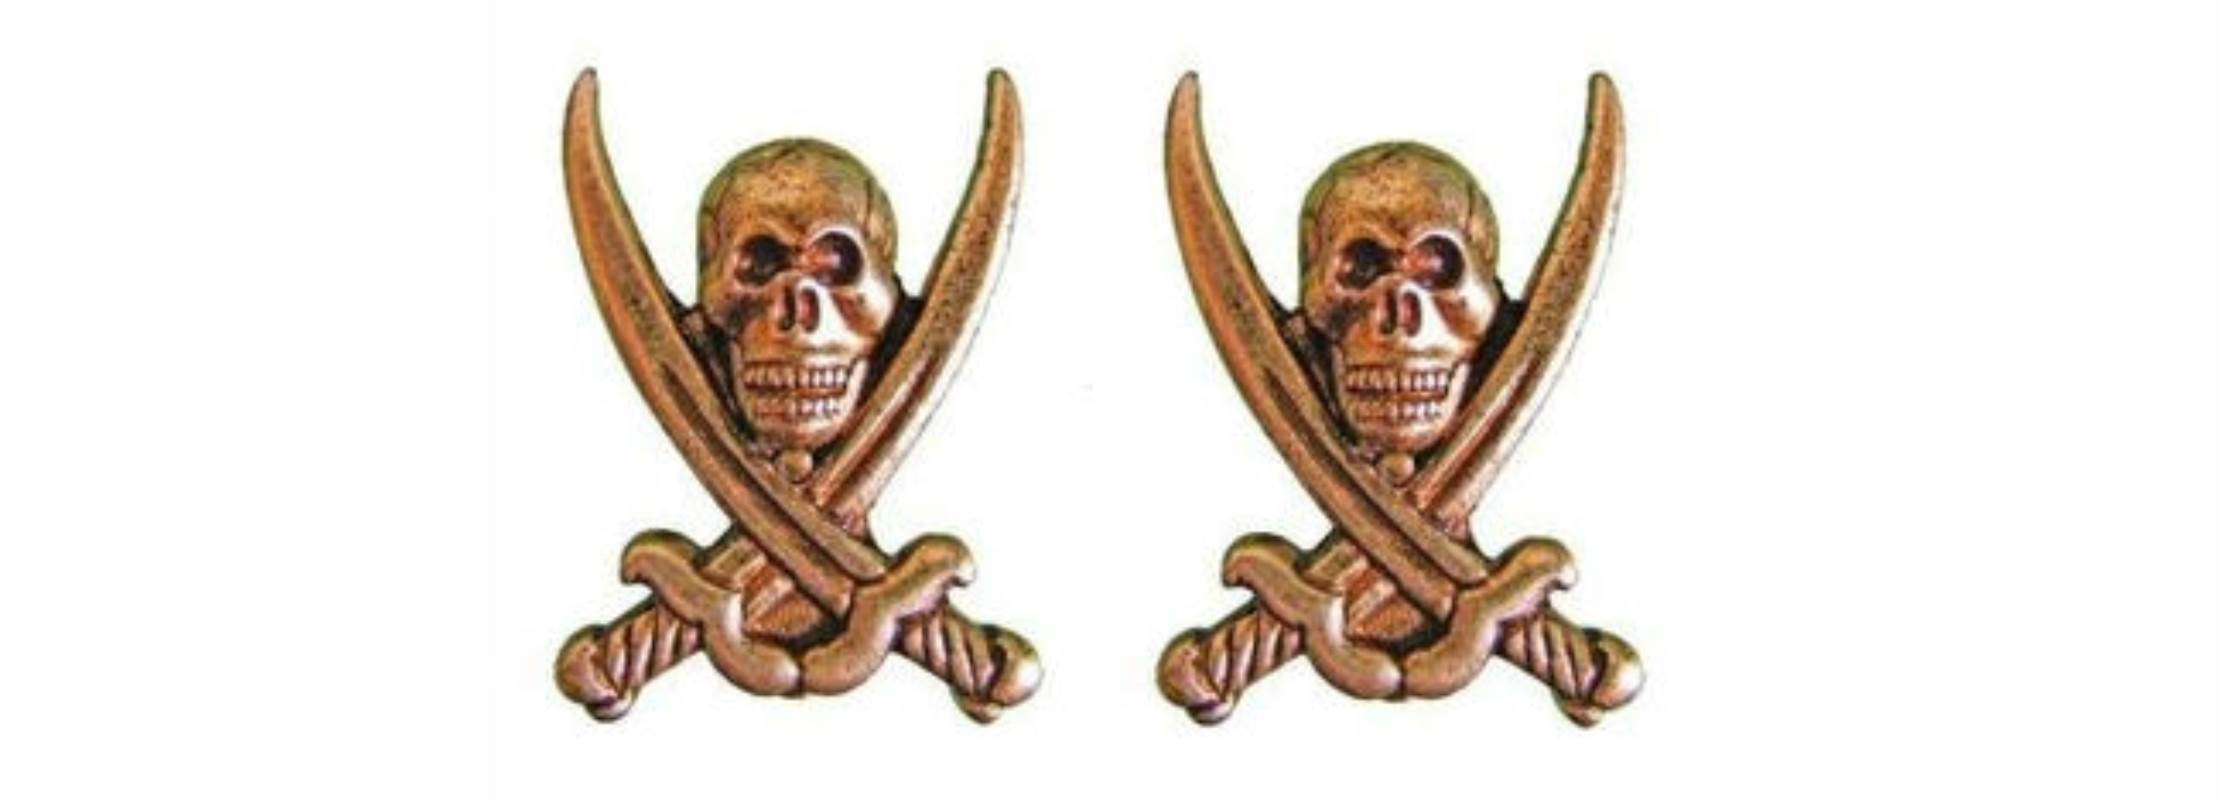 Pirate Wall Hangers